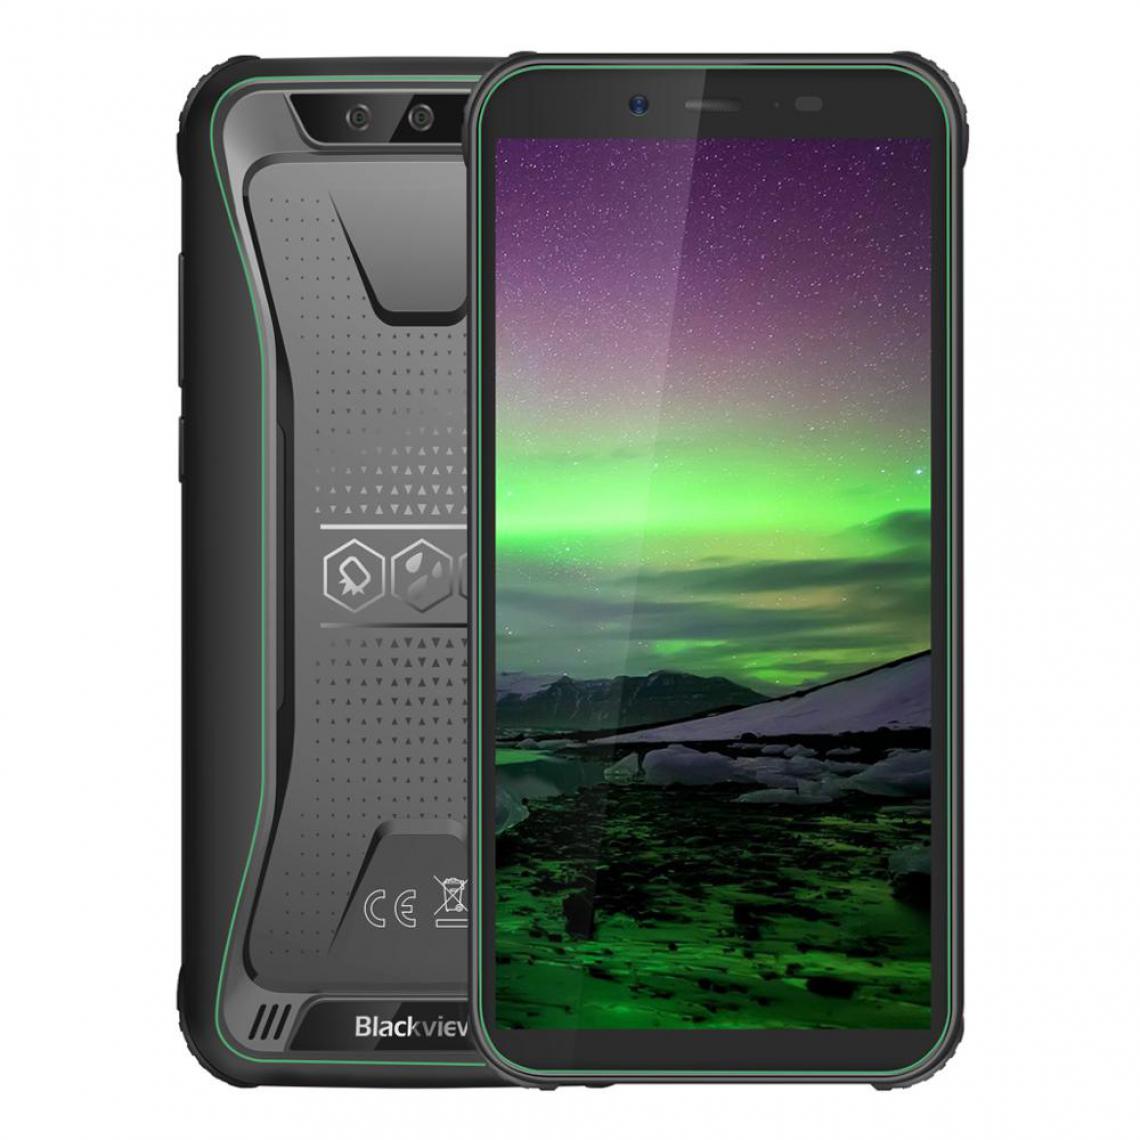 Blackview - BV5500 - Smartphone Android